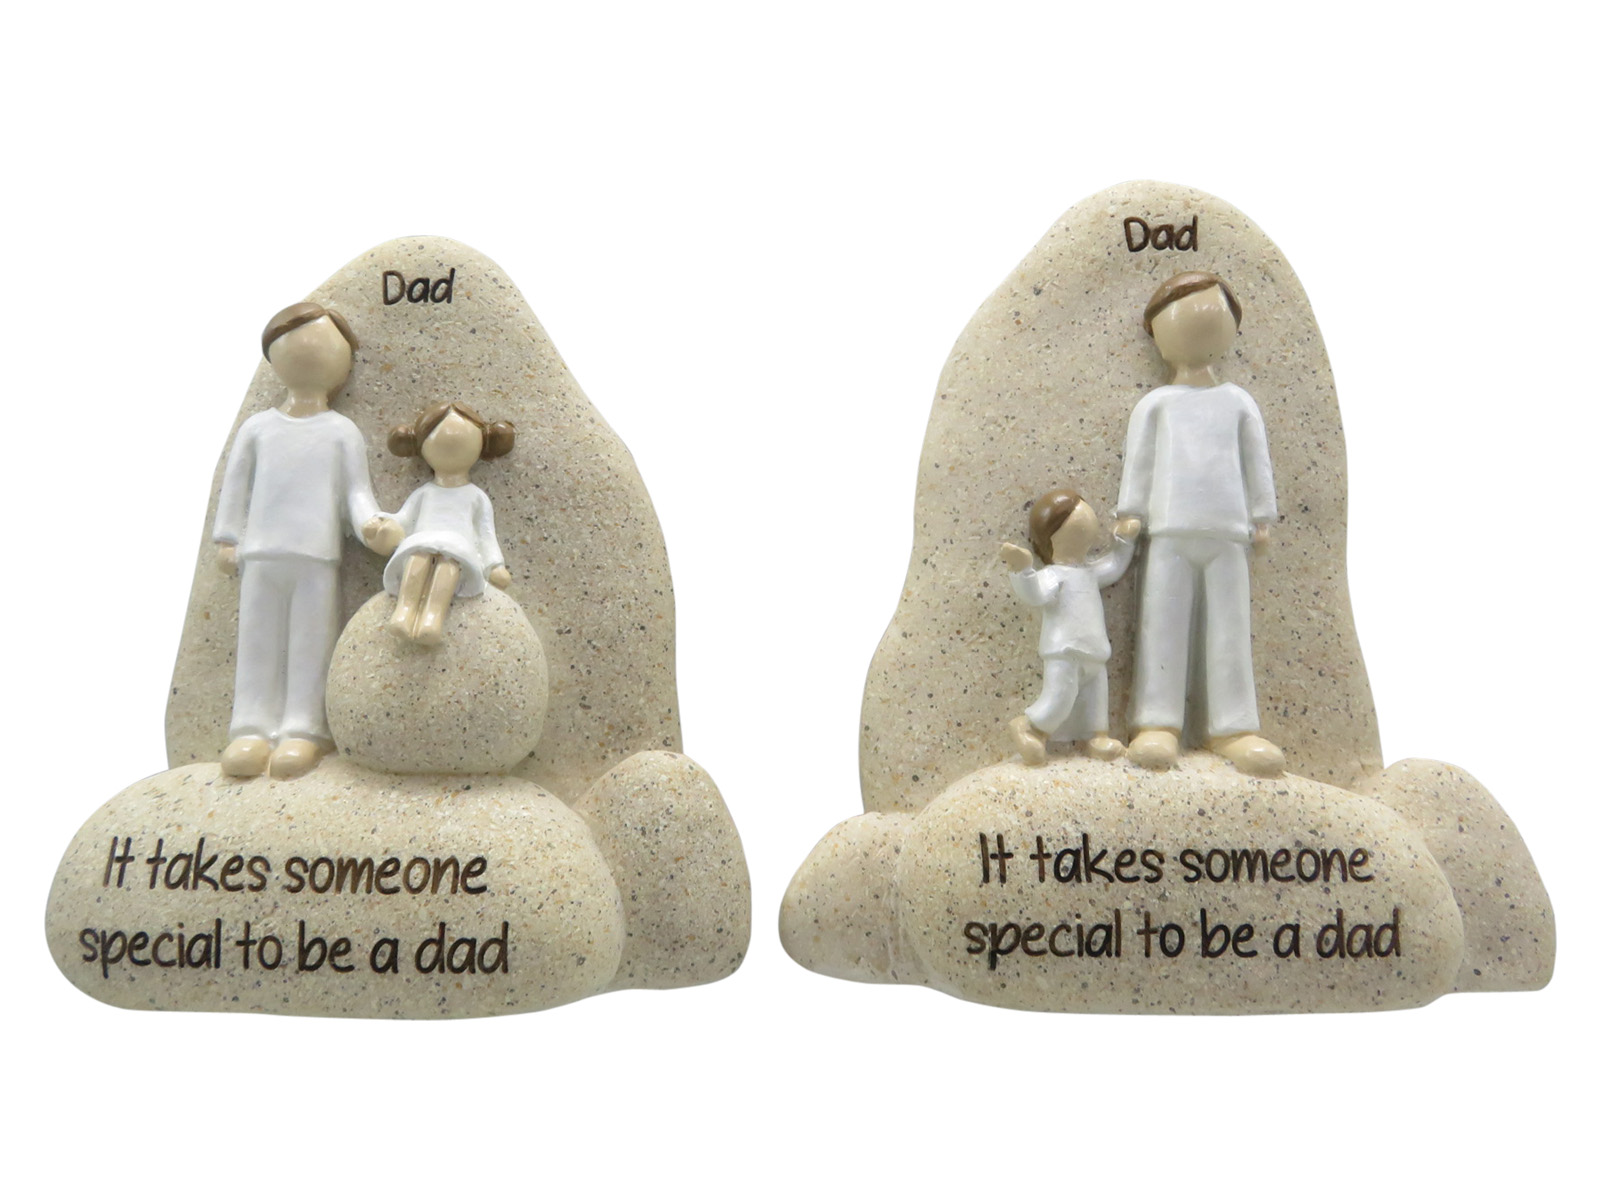 Father & Child on Inspirational "Dad" Message Rock